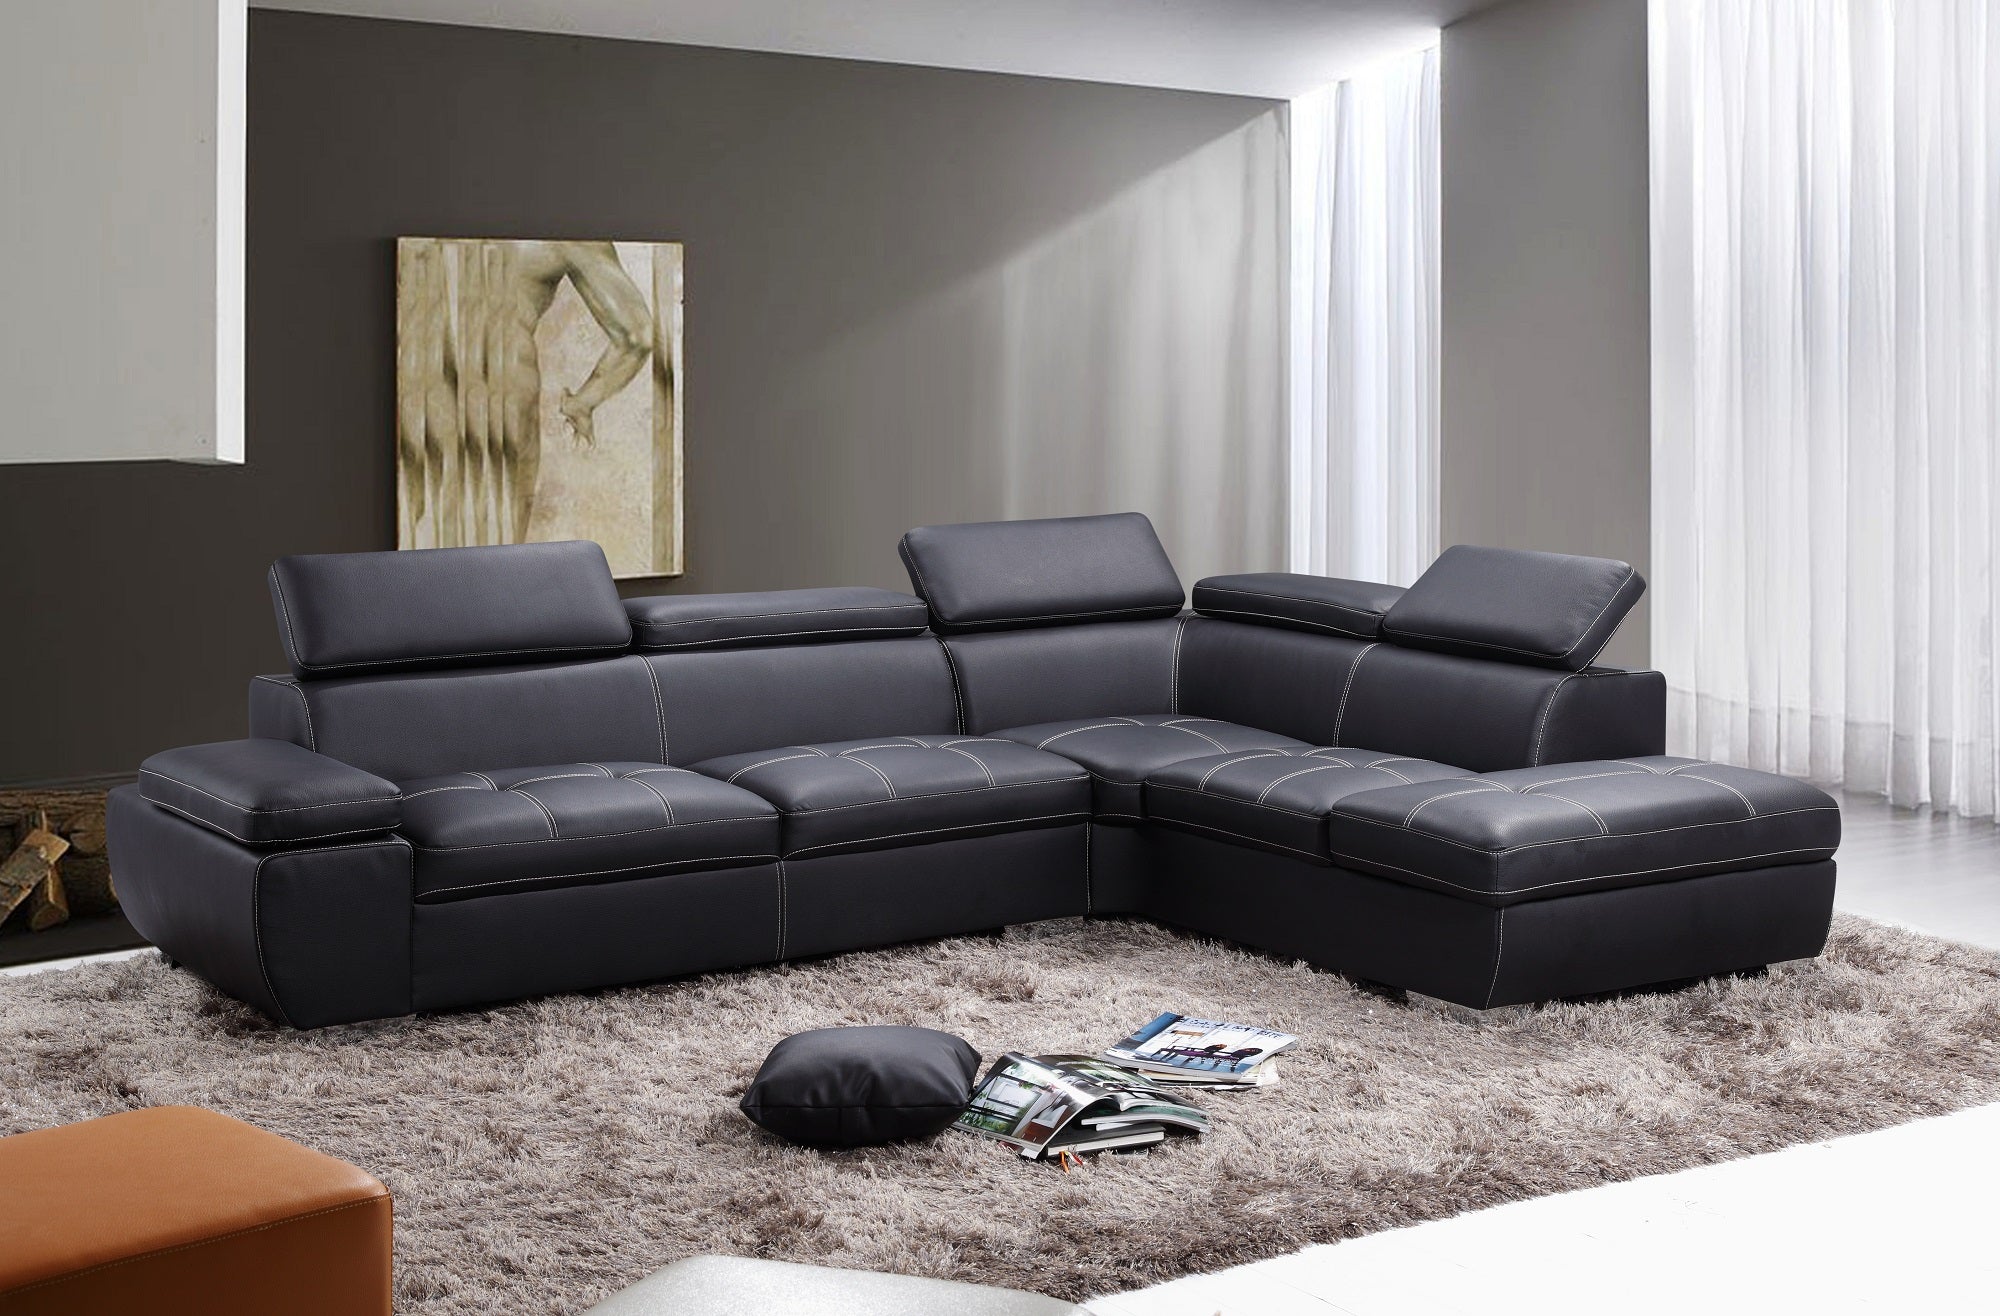 Gold Coast corner lounge suite in black leather. Perfect for relaxing and entertaining.